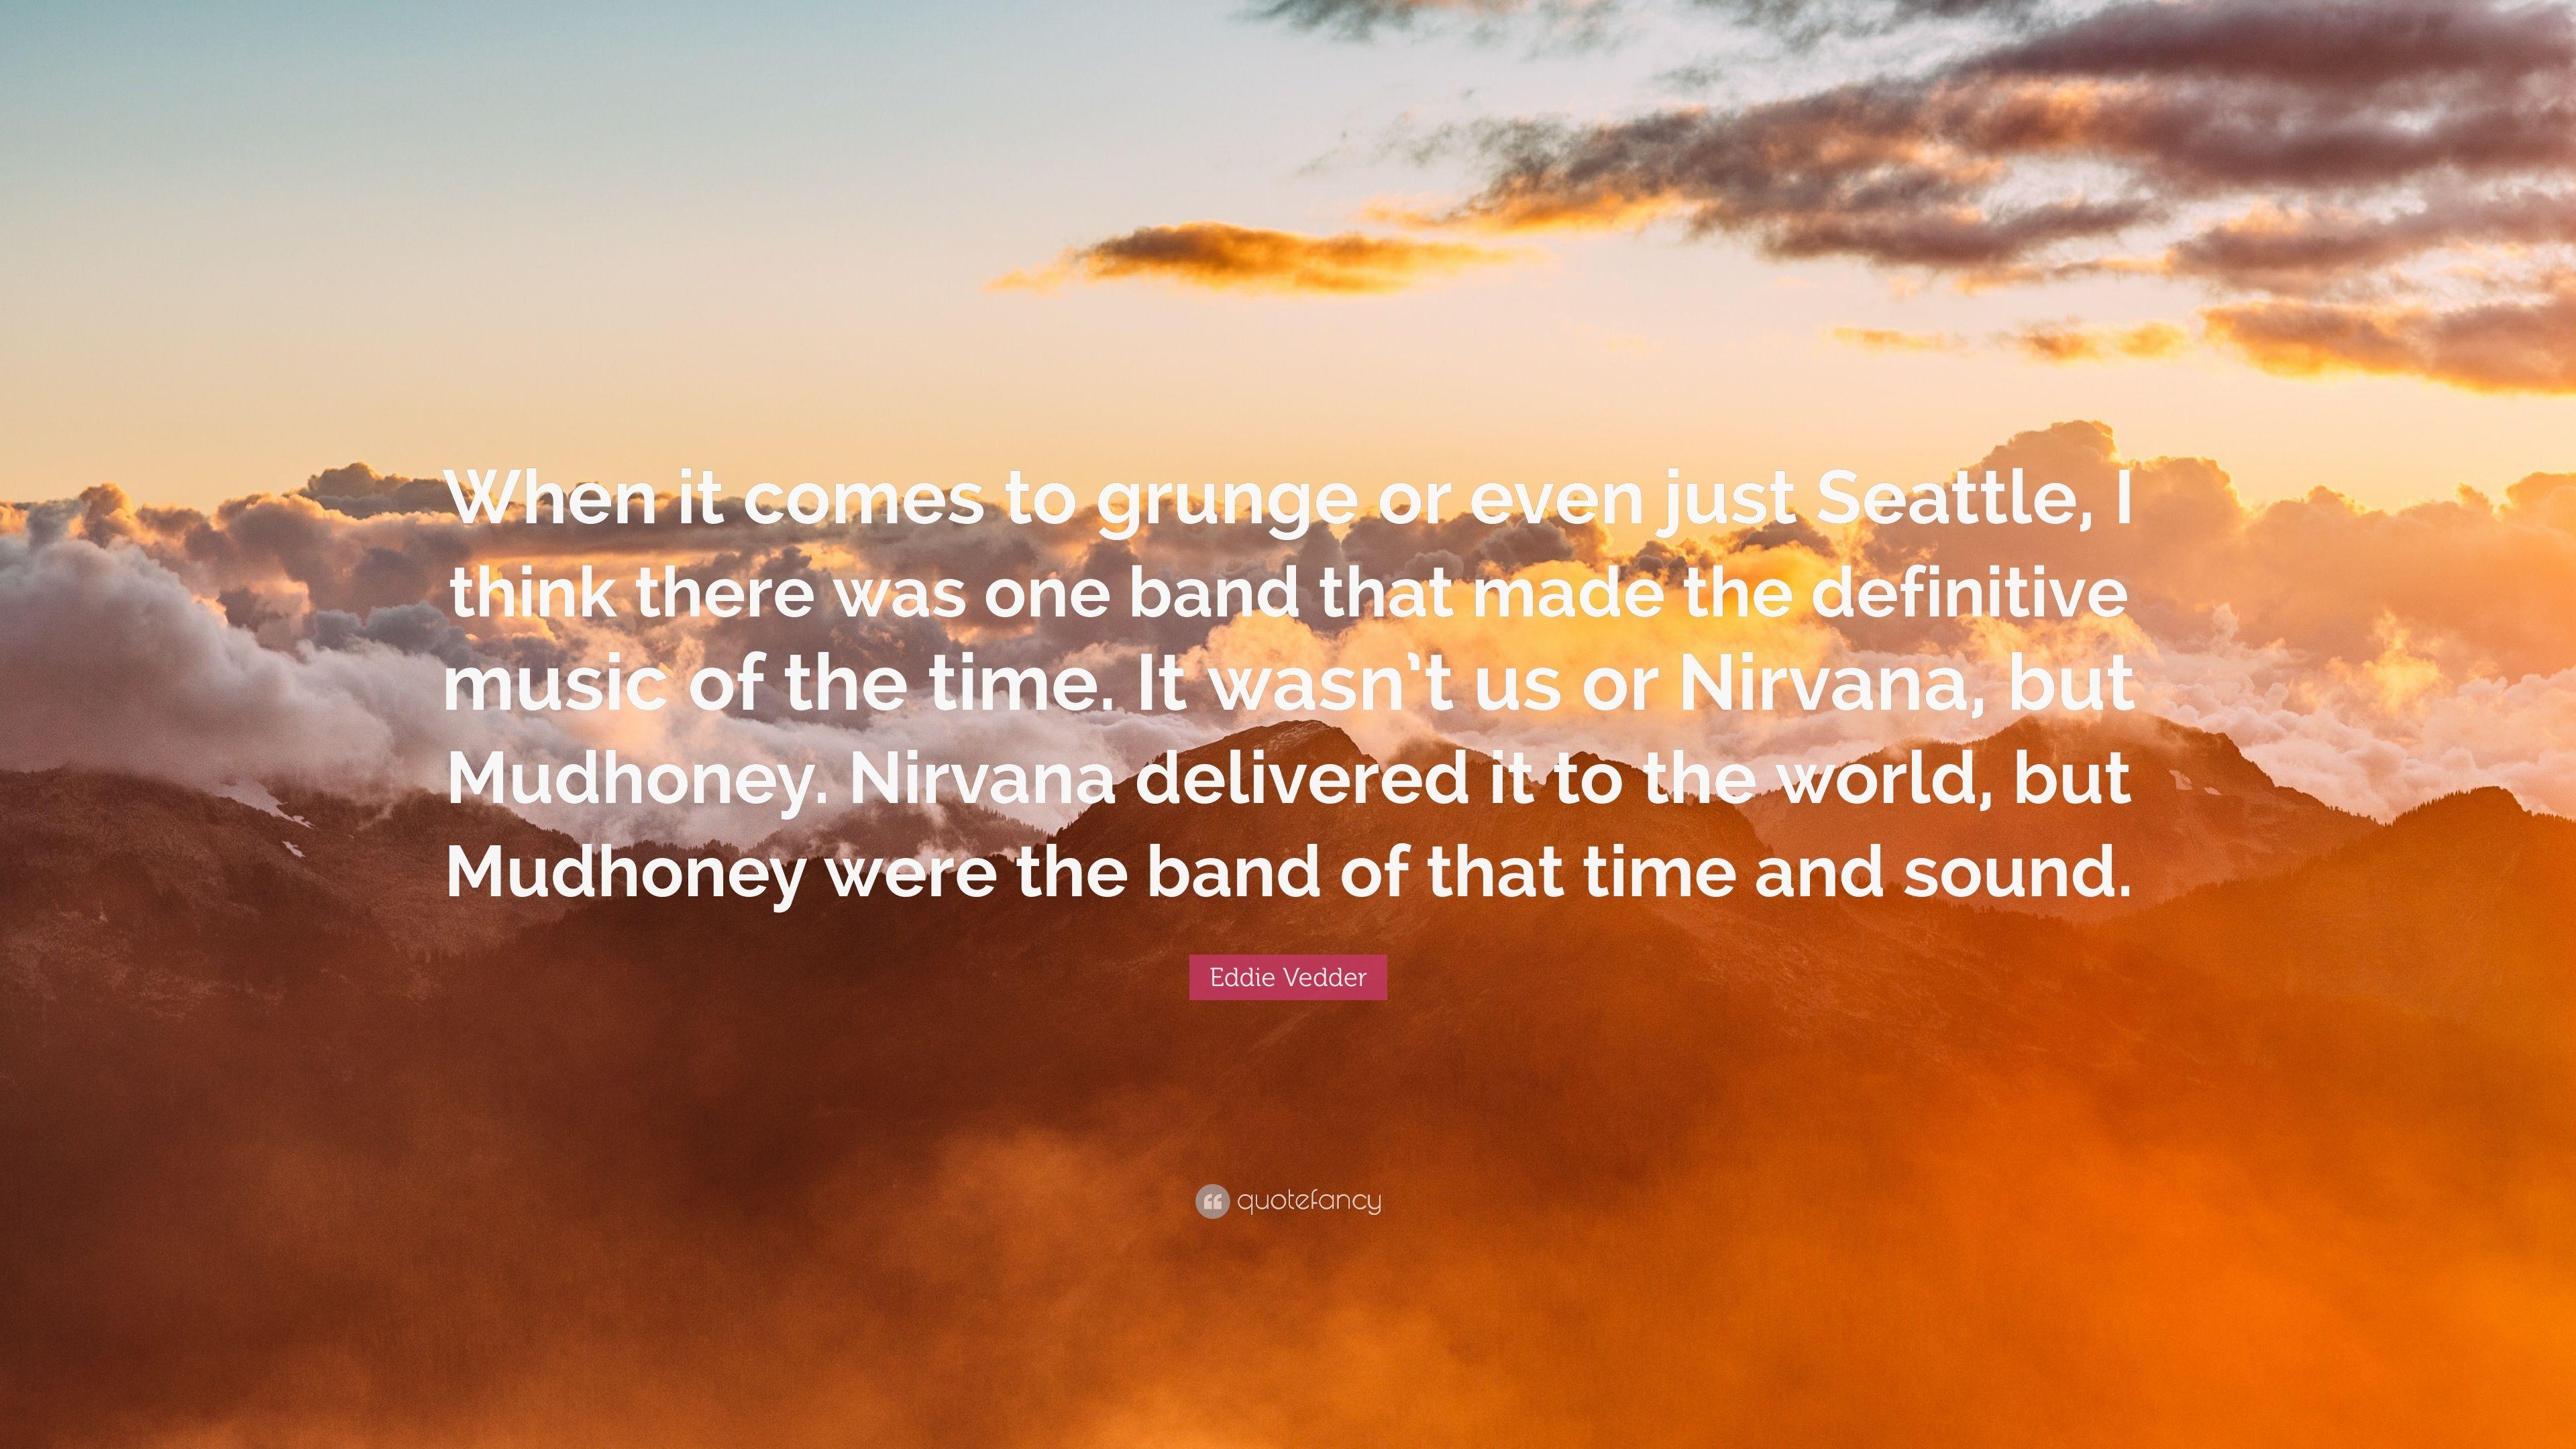 Eddie Vedder Quote: “When it comes to grunge or even just Seattle, I